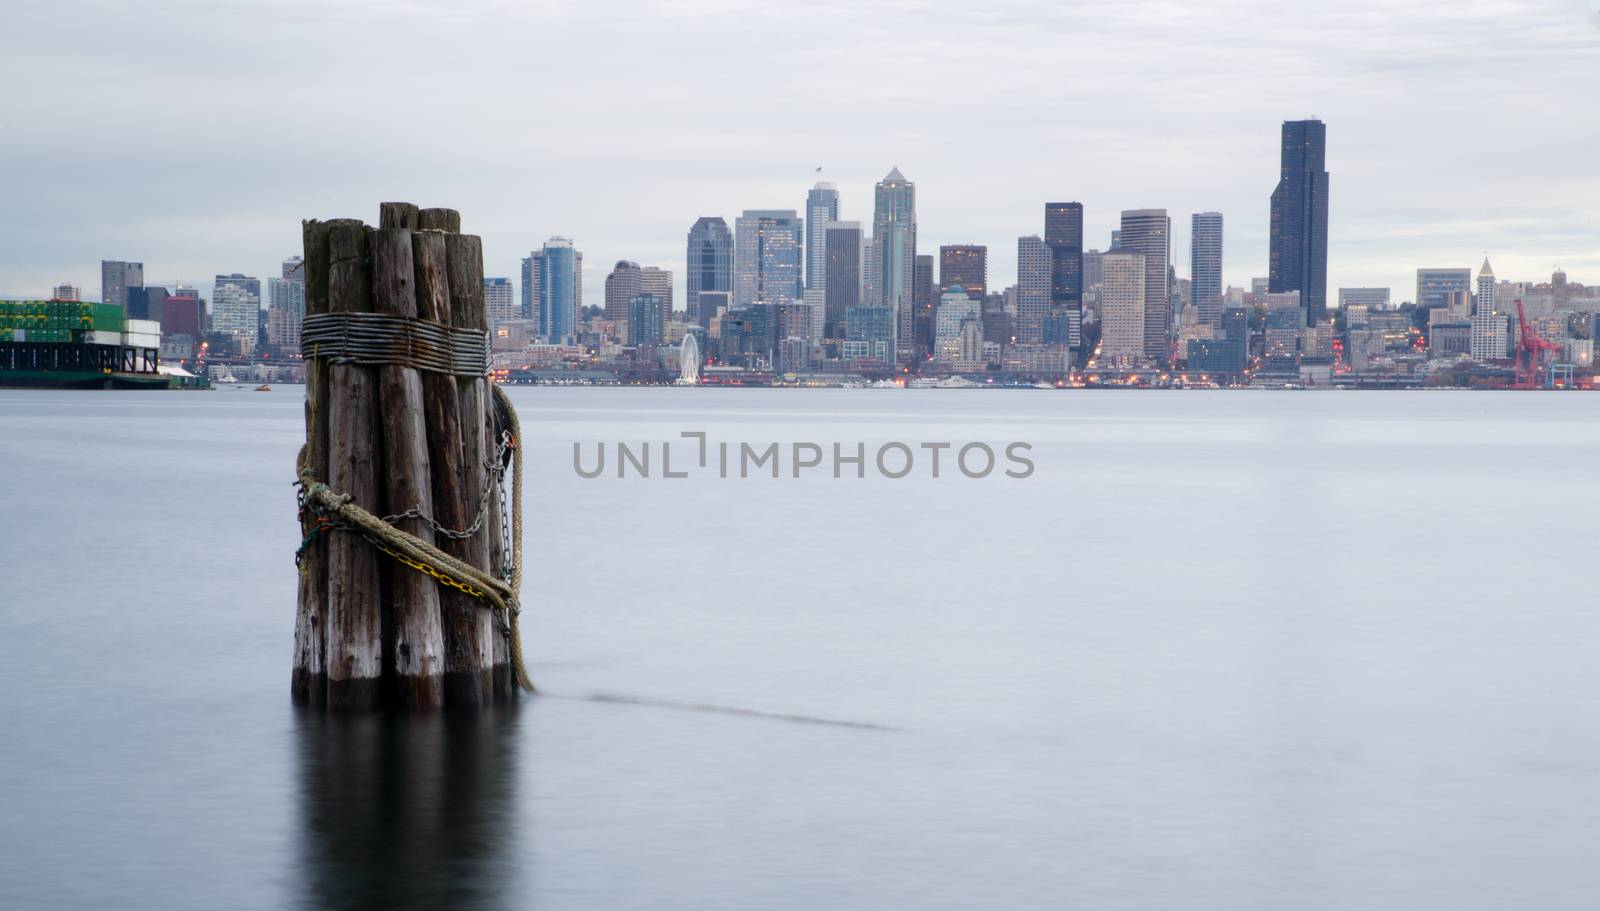 Infrastructure, Buildings, and waterfront attractions Elliott Bay Seattle